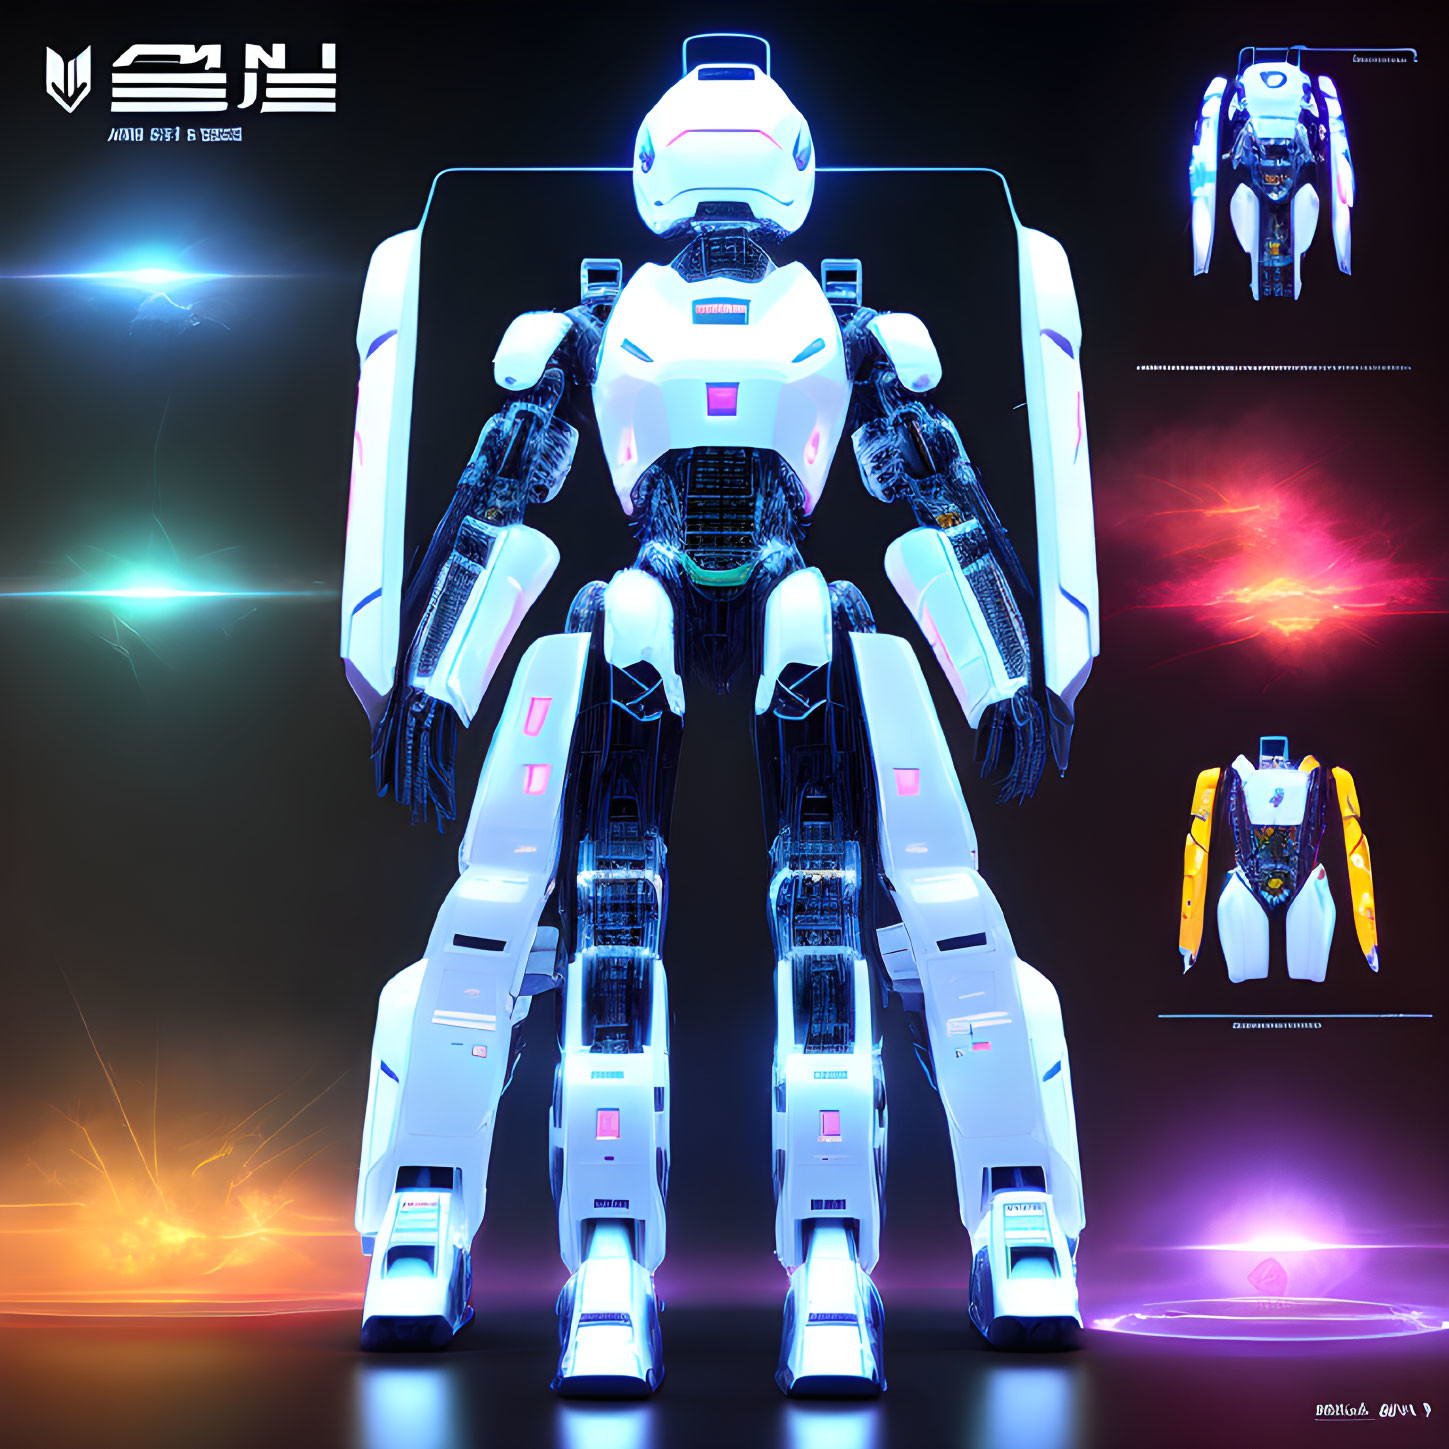 Futuristic white and blue humanoid robot in dynamic pose on neon-lit background